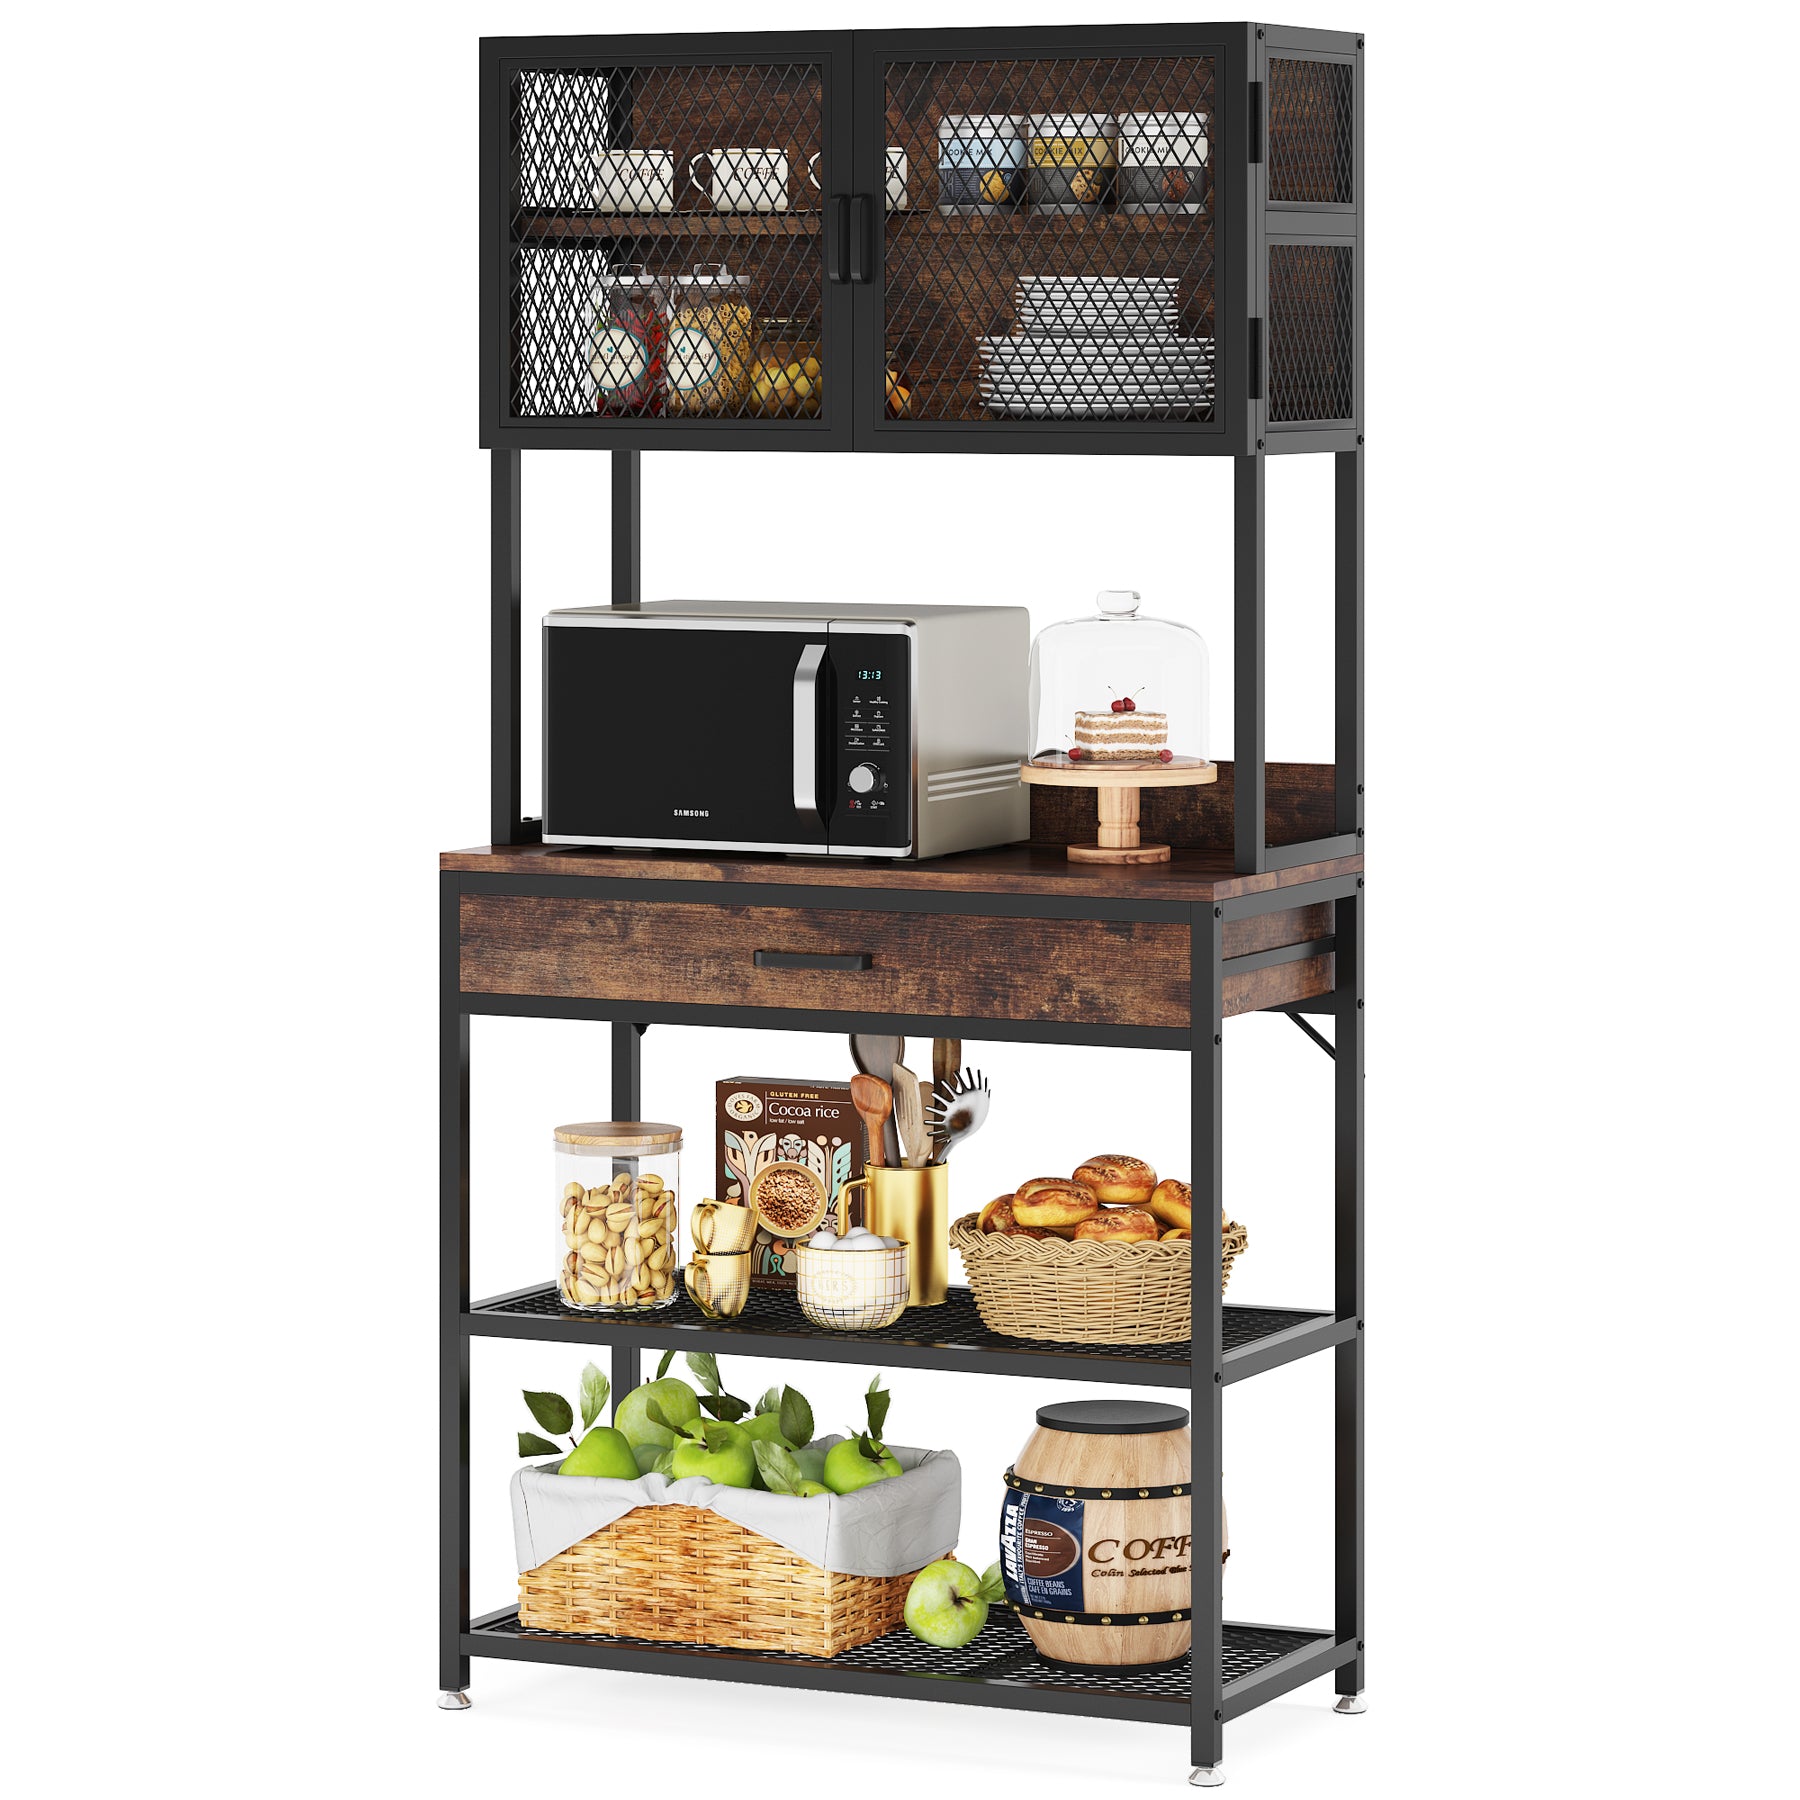 Tribesigns 55 inch Tall Kitchen Baker Rack with Storage, 5-Tier